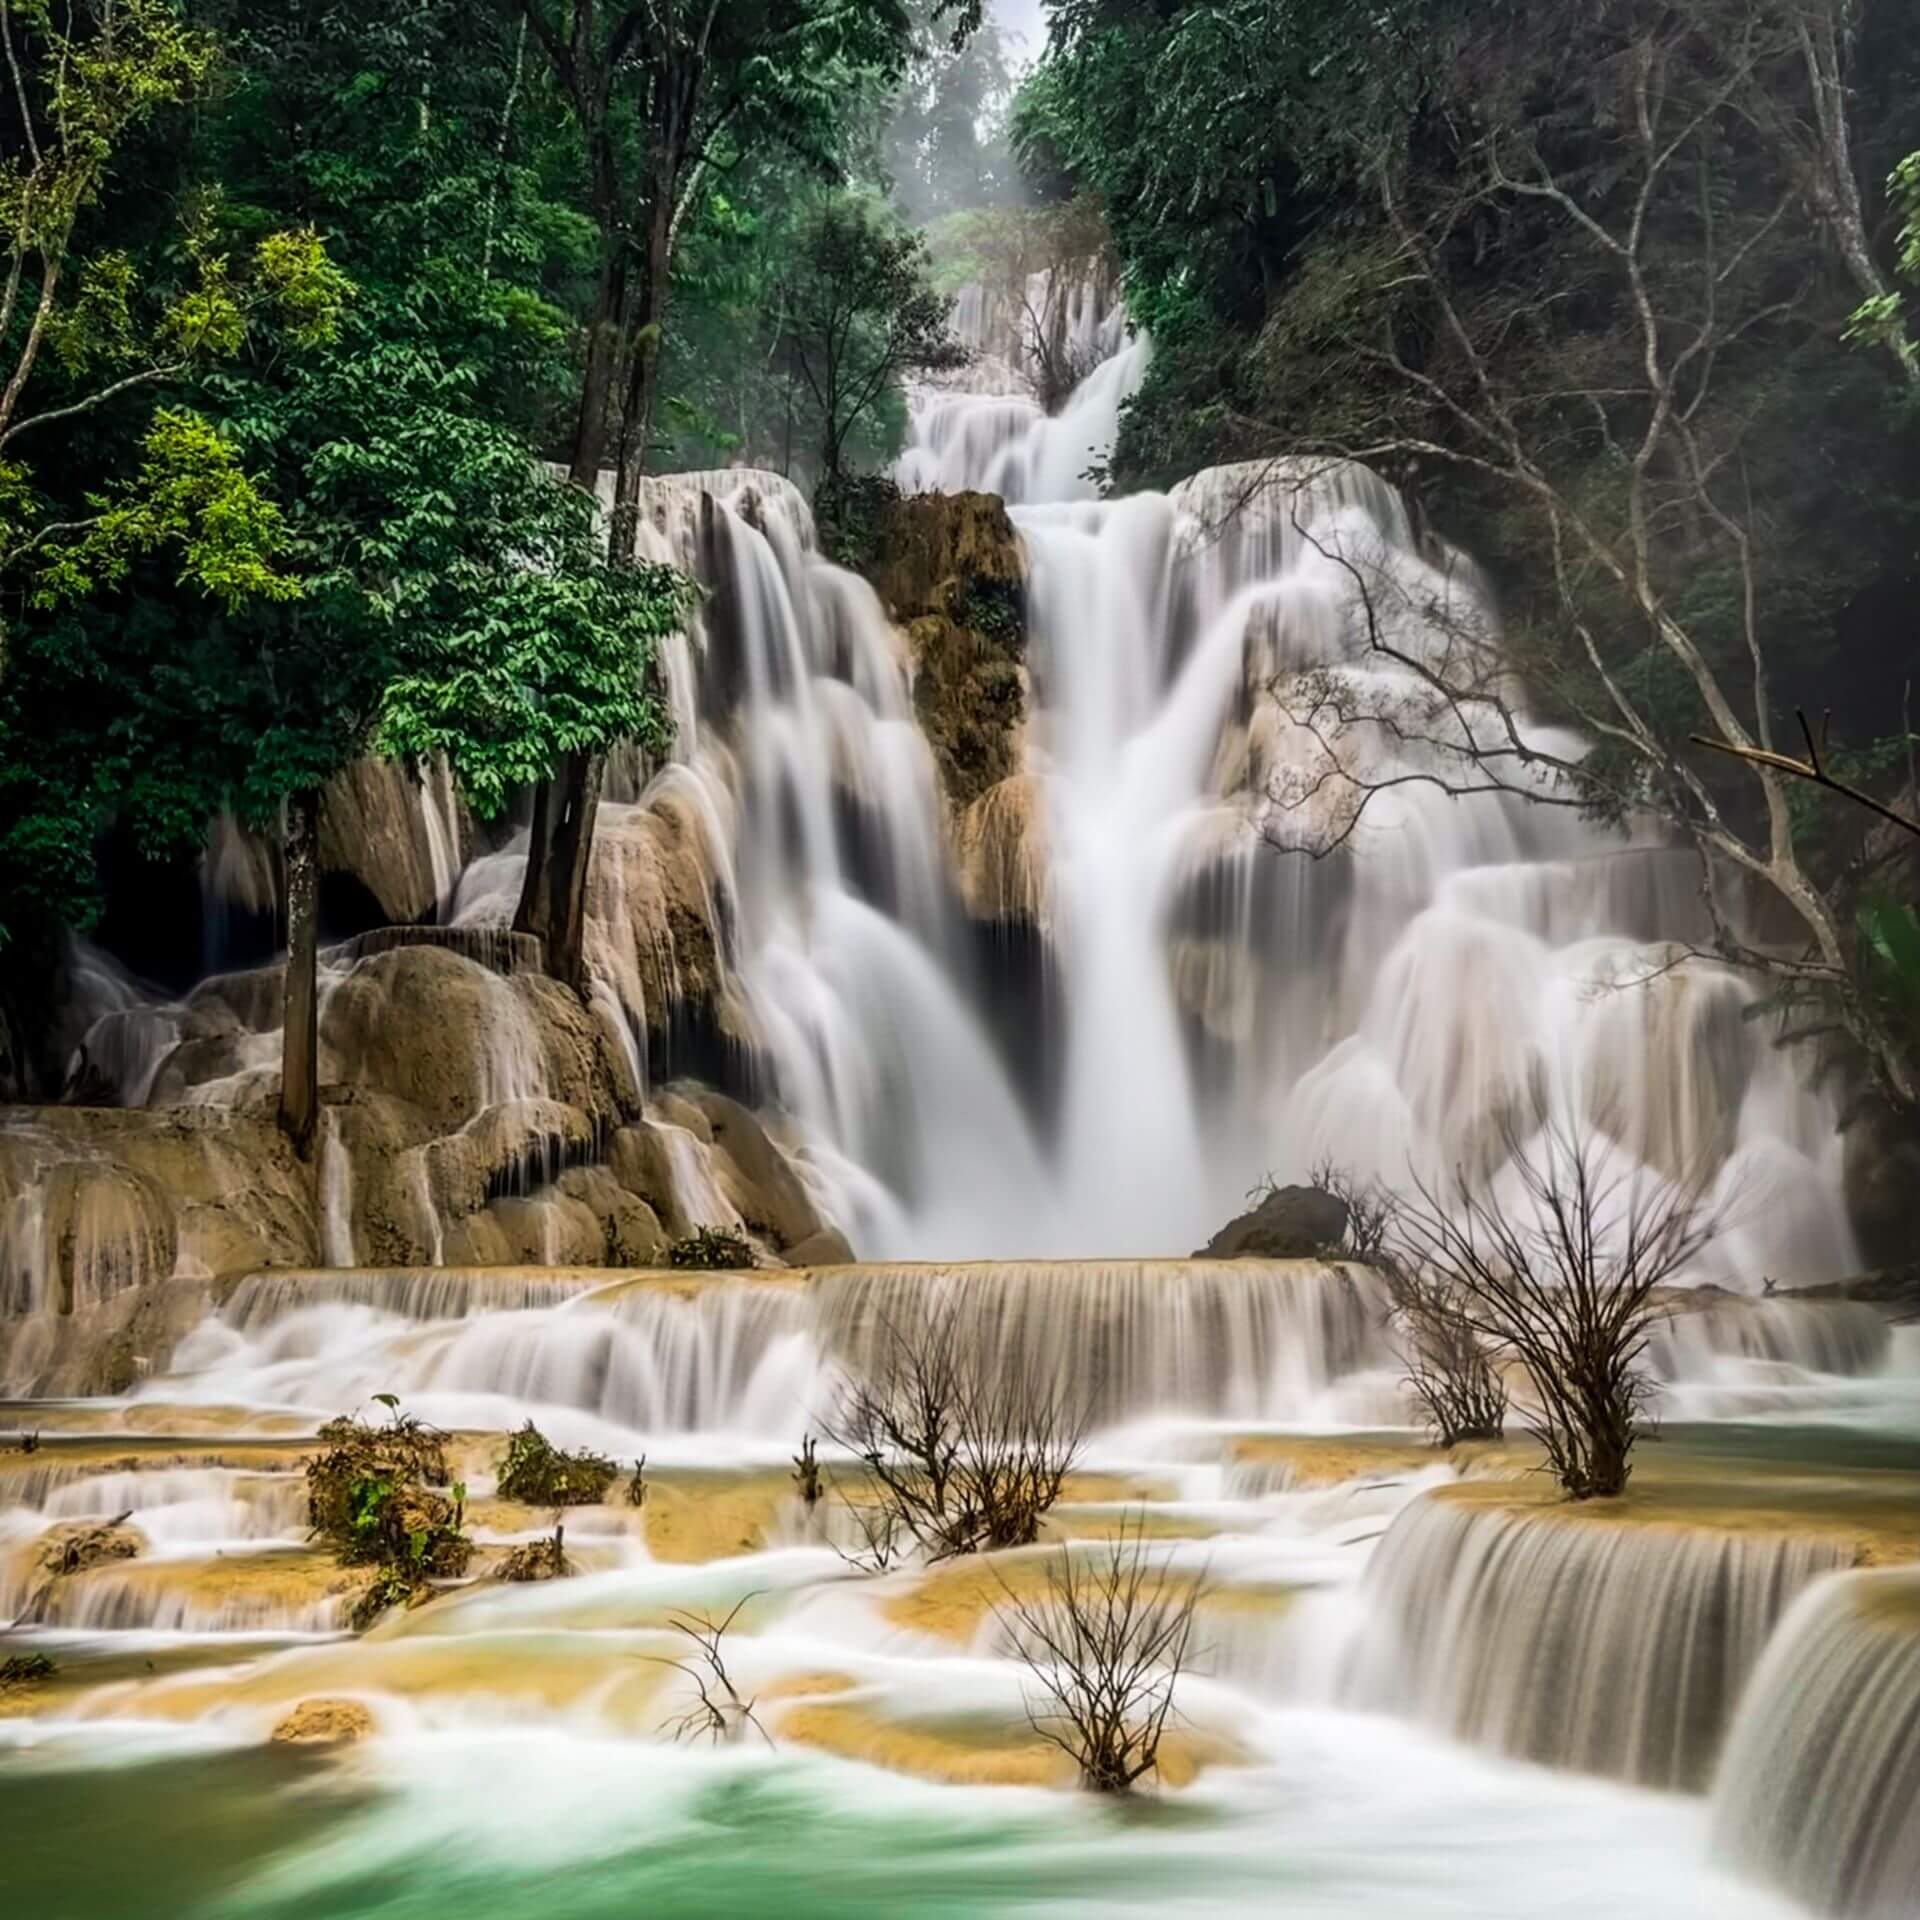 Luang Prabang Kuang Si - Uncovering Laos - The unexplored side of South East Asia